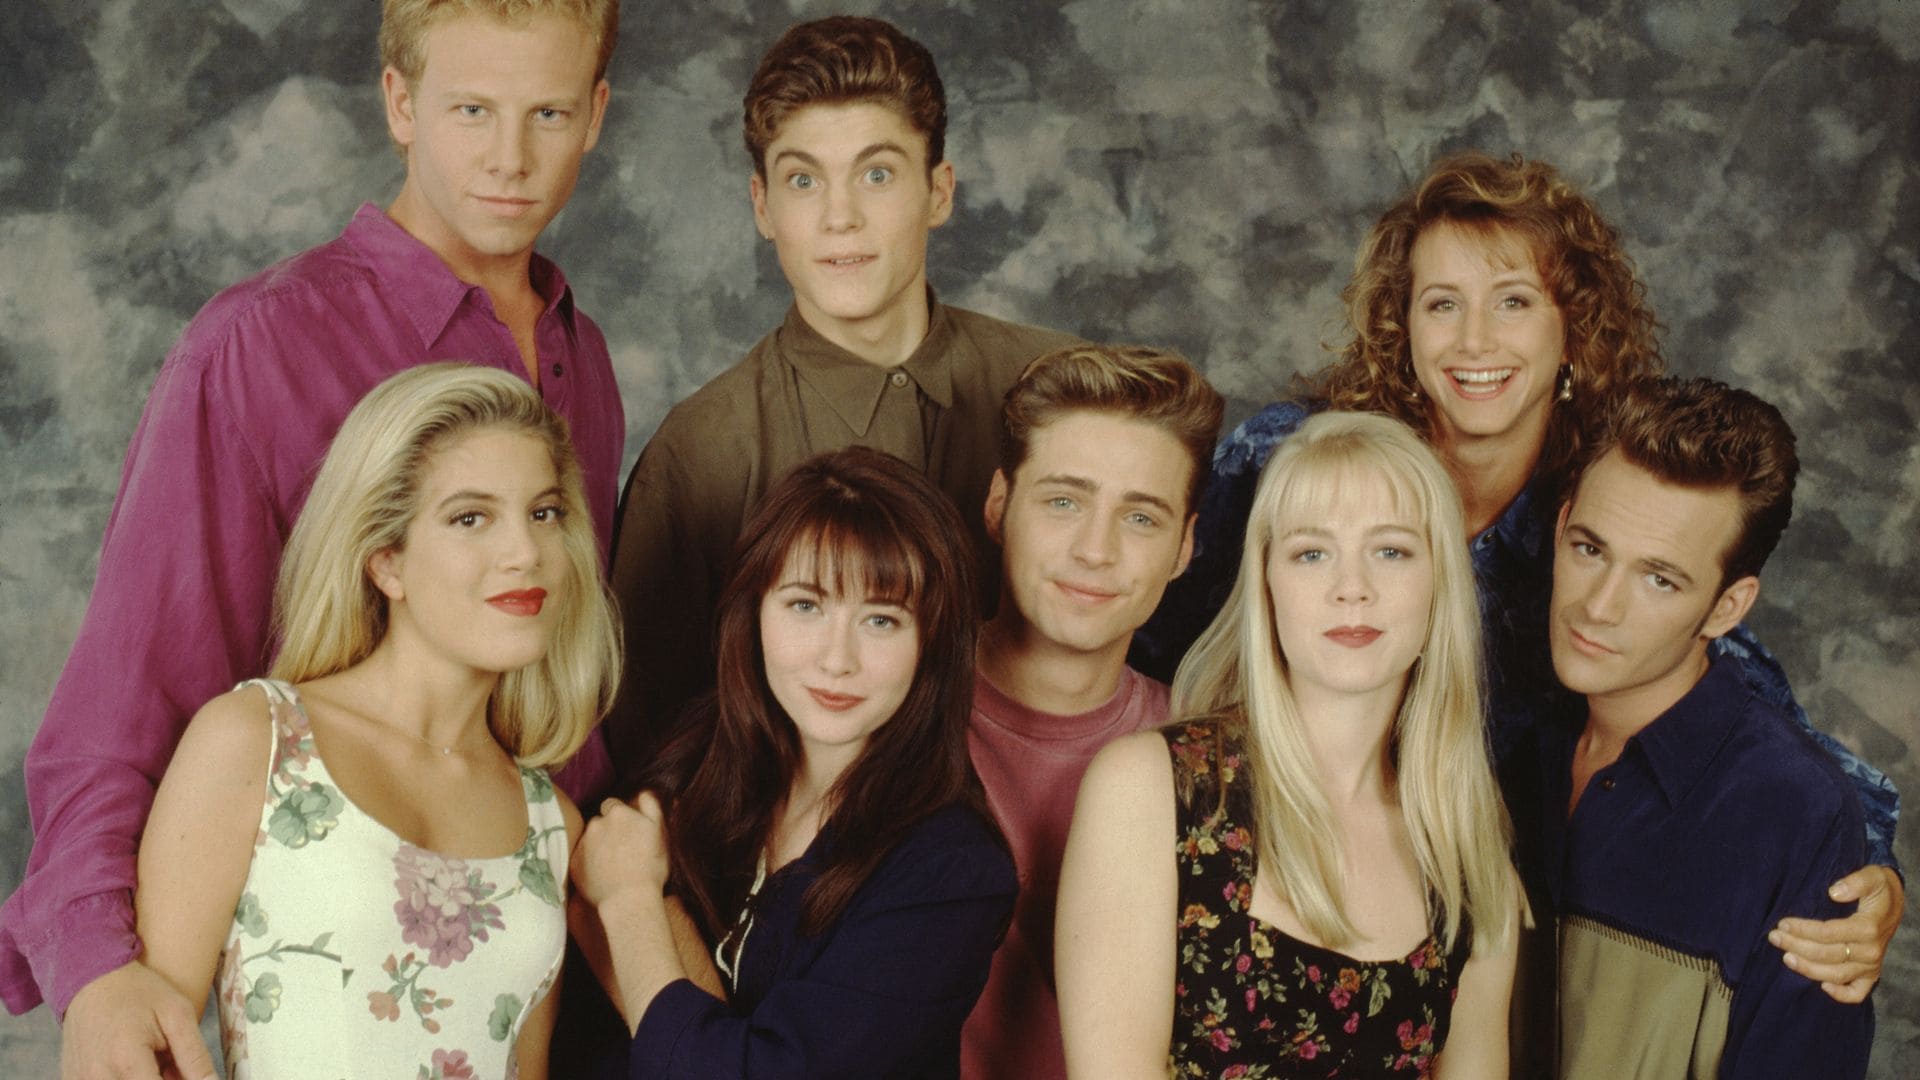 The Beverly Hills, 90210 cast poses for a portrait on set, September 1991 in Los Angeles, California. Left to right: Ian Ziering, Tori Spelling, Shannen Doherty, Brian Austin Green, Jason Priestley,  Jennie Garth, Gabrielle Carteris and Luke Perry. (Photo by Mark Sennet/Getty Images)